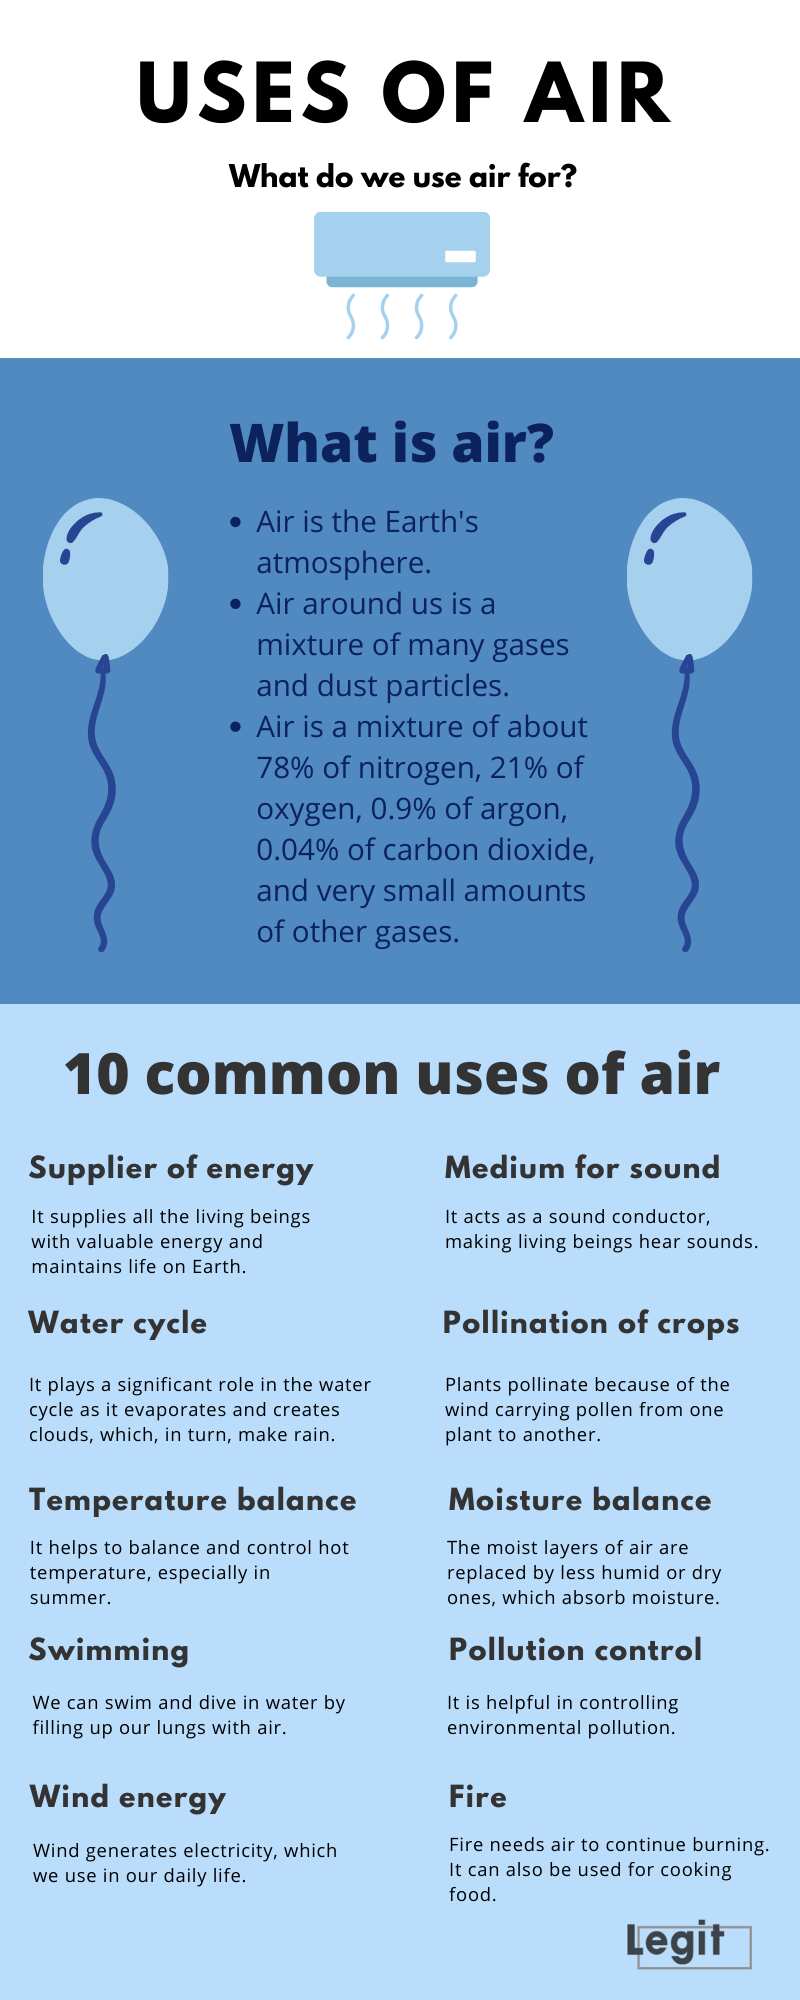 Uses of air